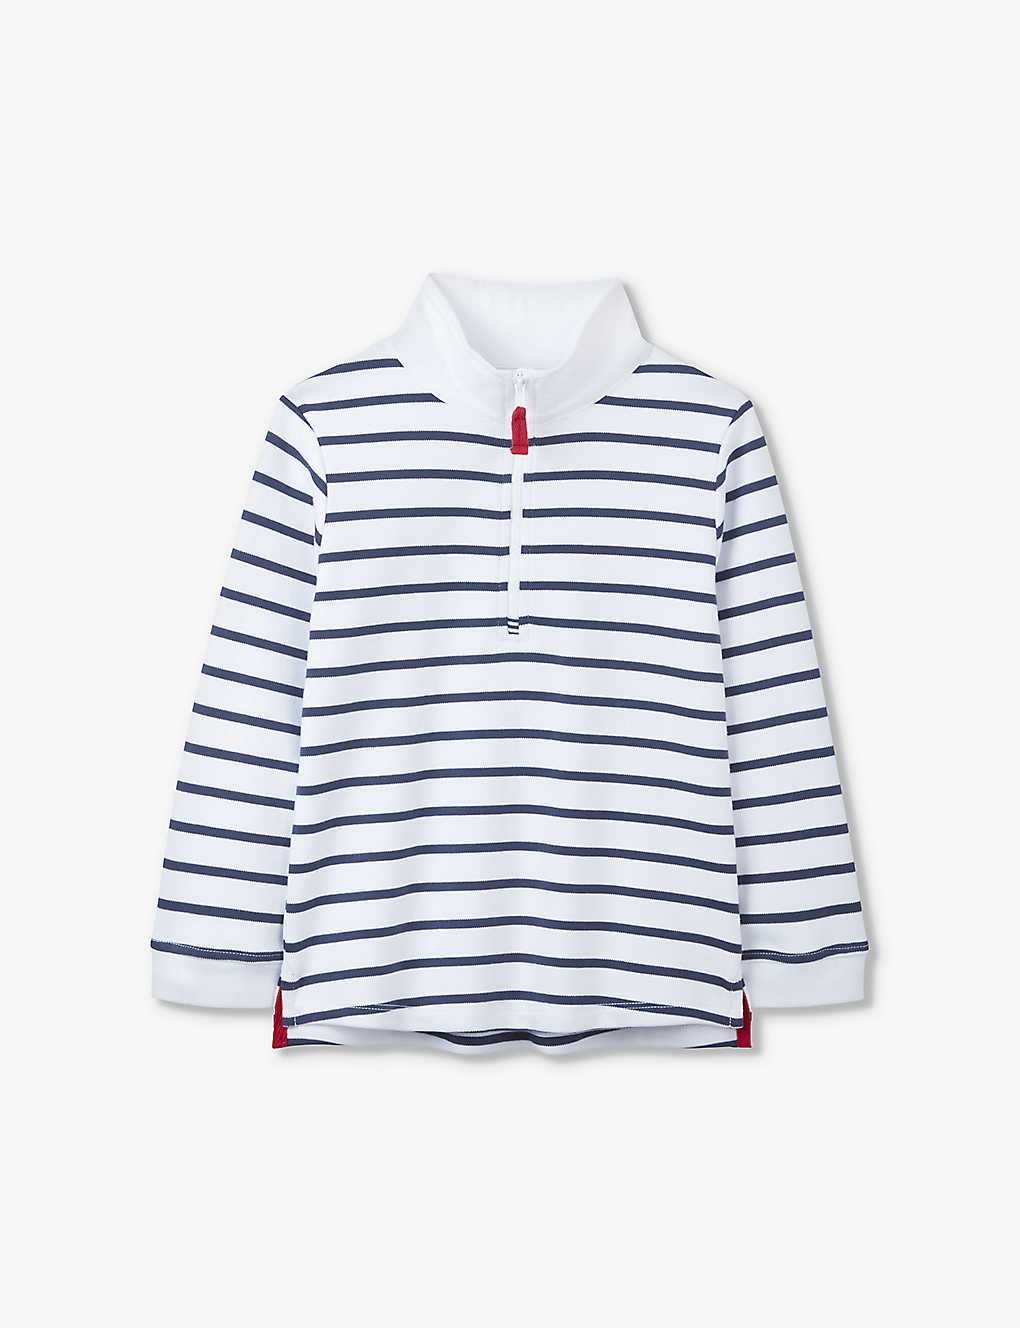 The Little White Company Babies'  Stripe Breton-stripe Cotton Rugby Top 0-18 Months